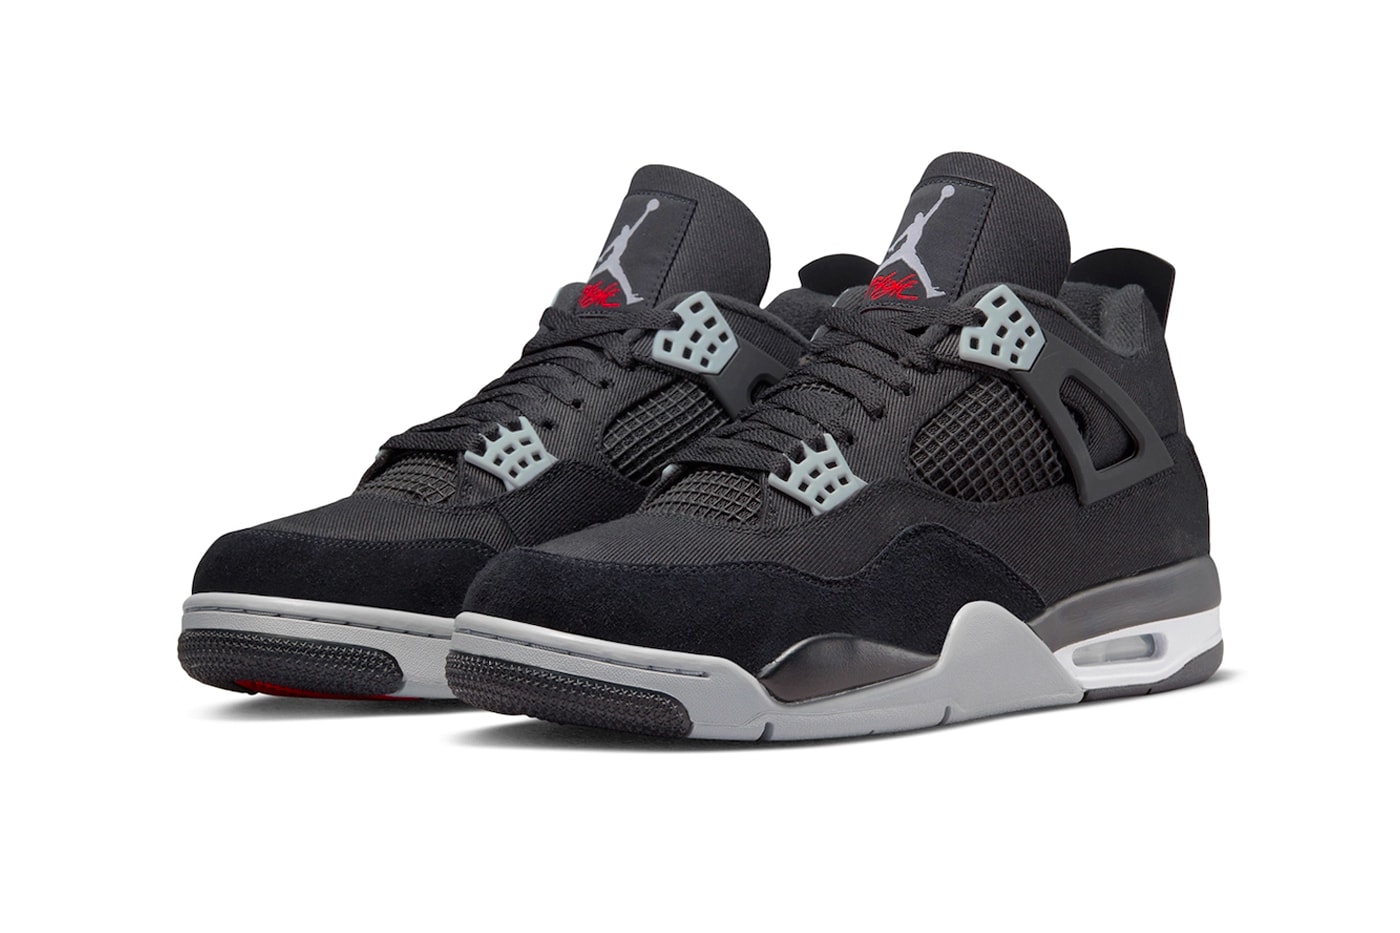 Air Jordan 4 Black Canvas Official Look Release Info DH7138-006 Date Buy Price Black Light Steel Grey White Fire Red